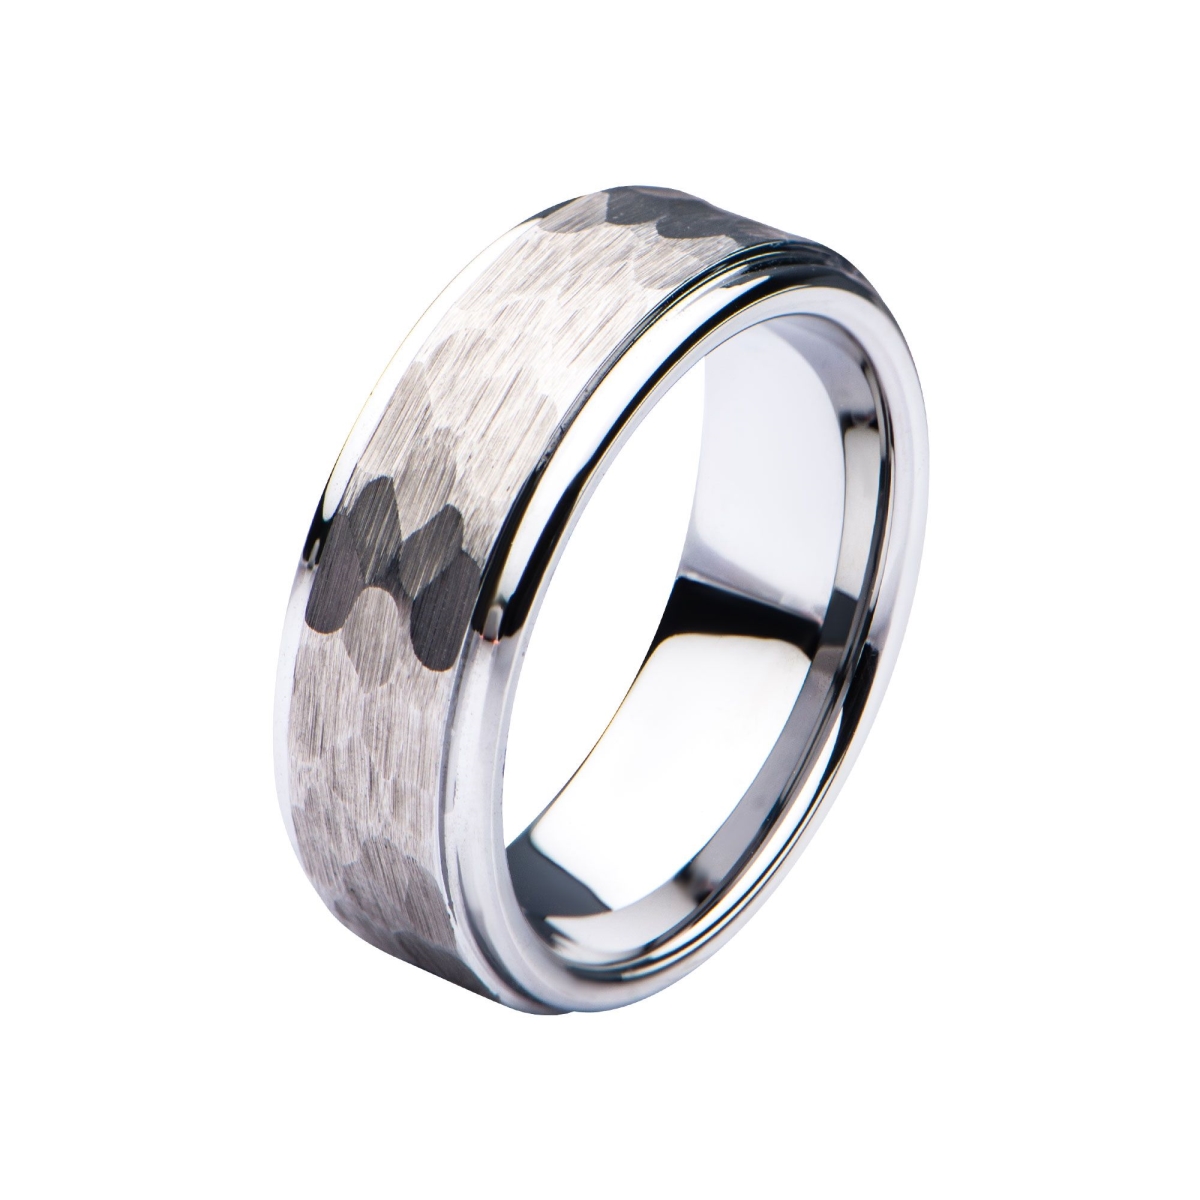 Steel Hammered Ring - Size 9